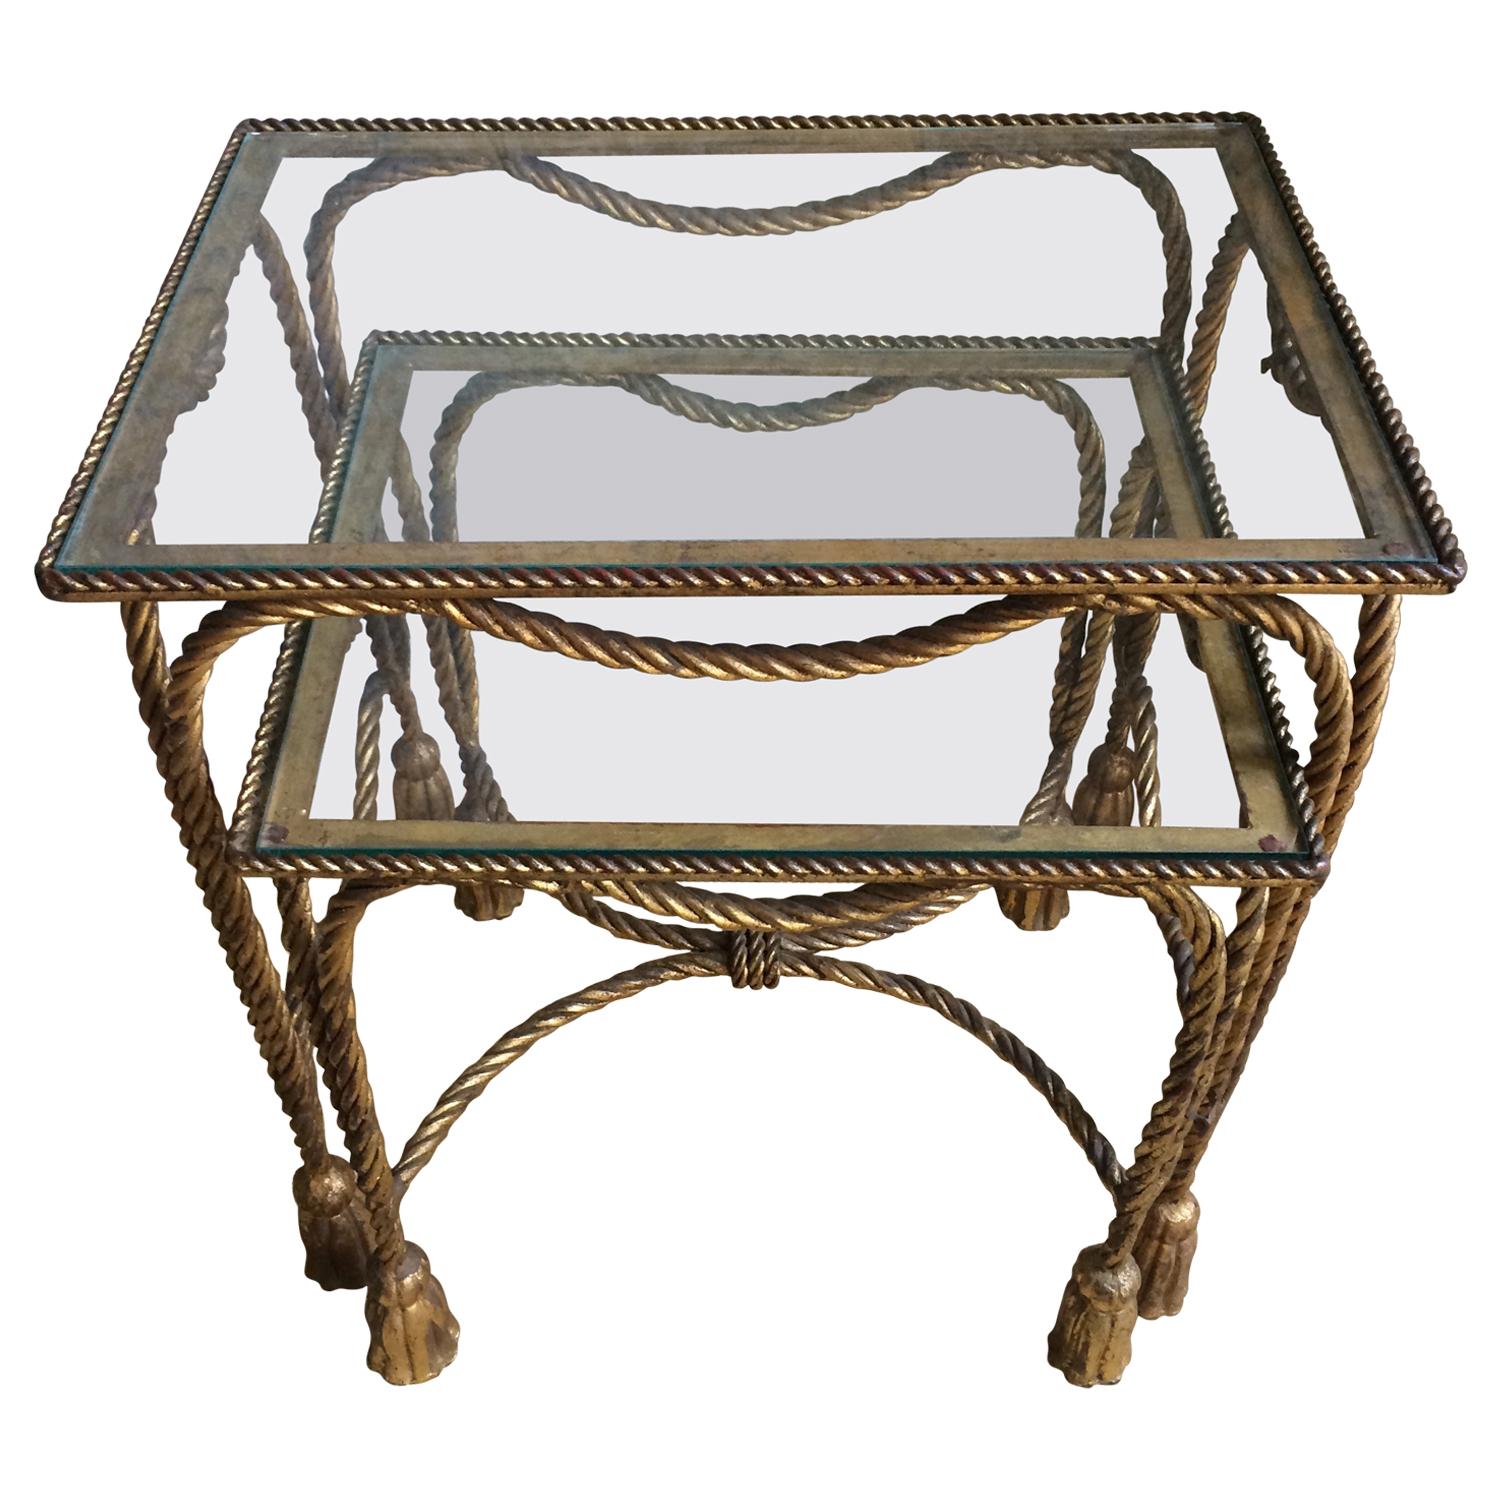 Pair of Italian Gilt Nesting Tables with Rope and Tassel Detail